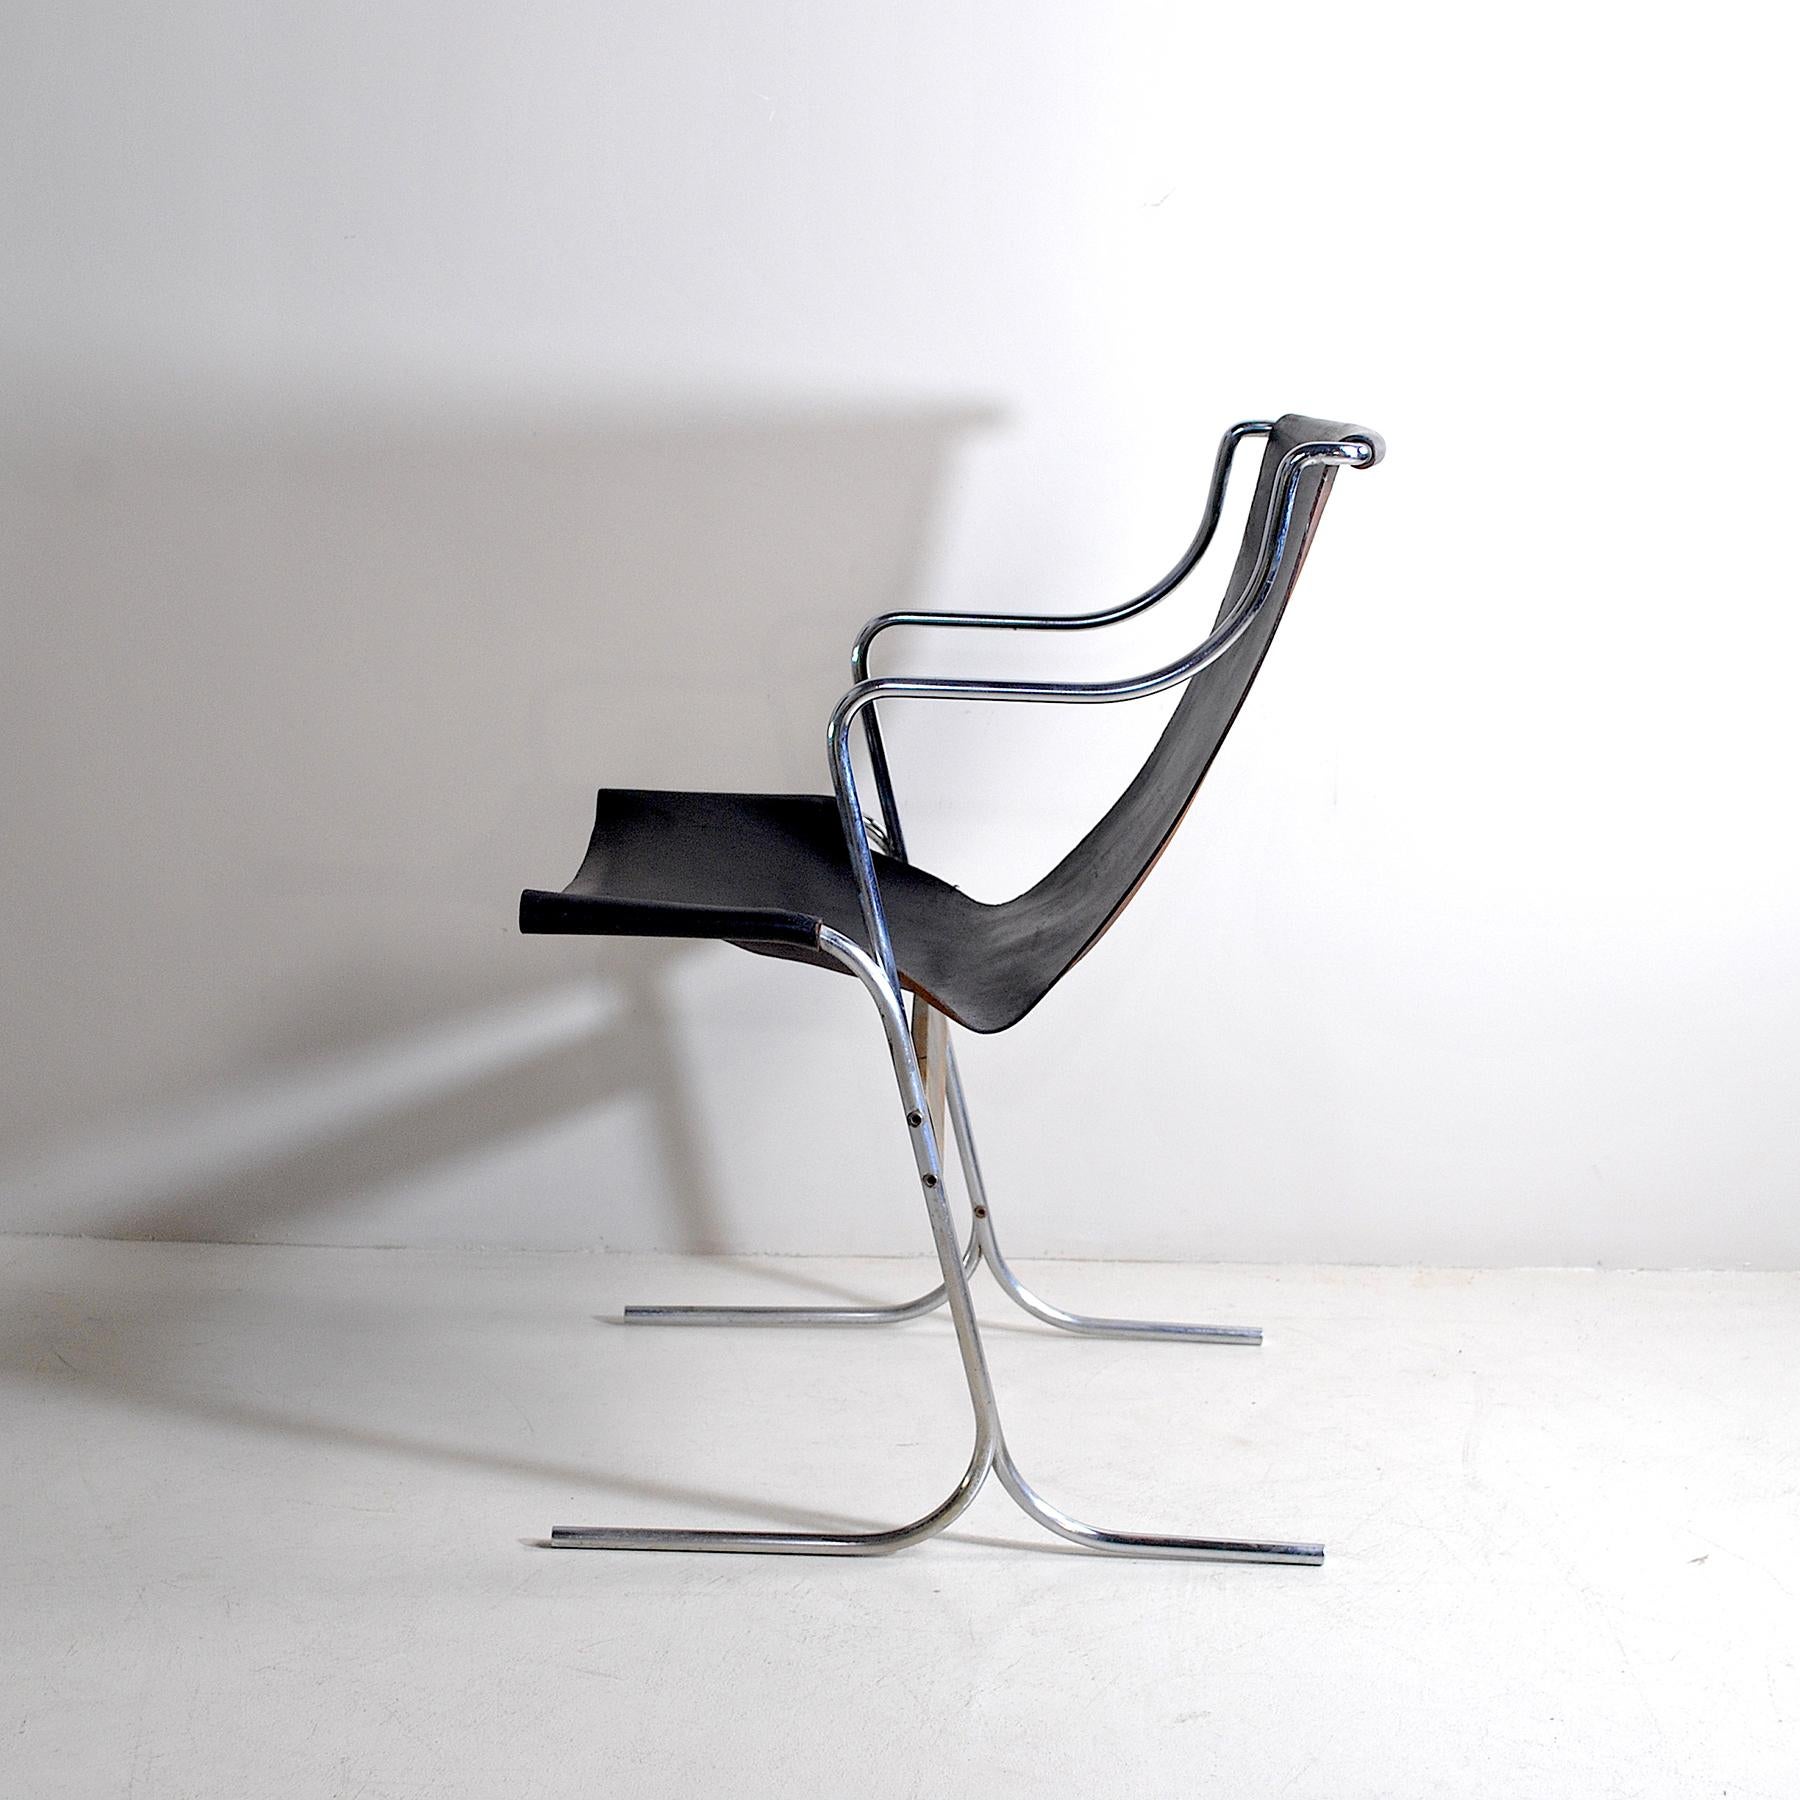 Steel Italian Midcentury Club Chair, Late 1960s For Sale